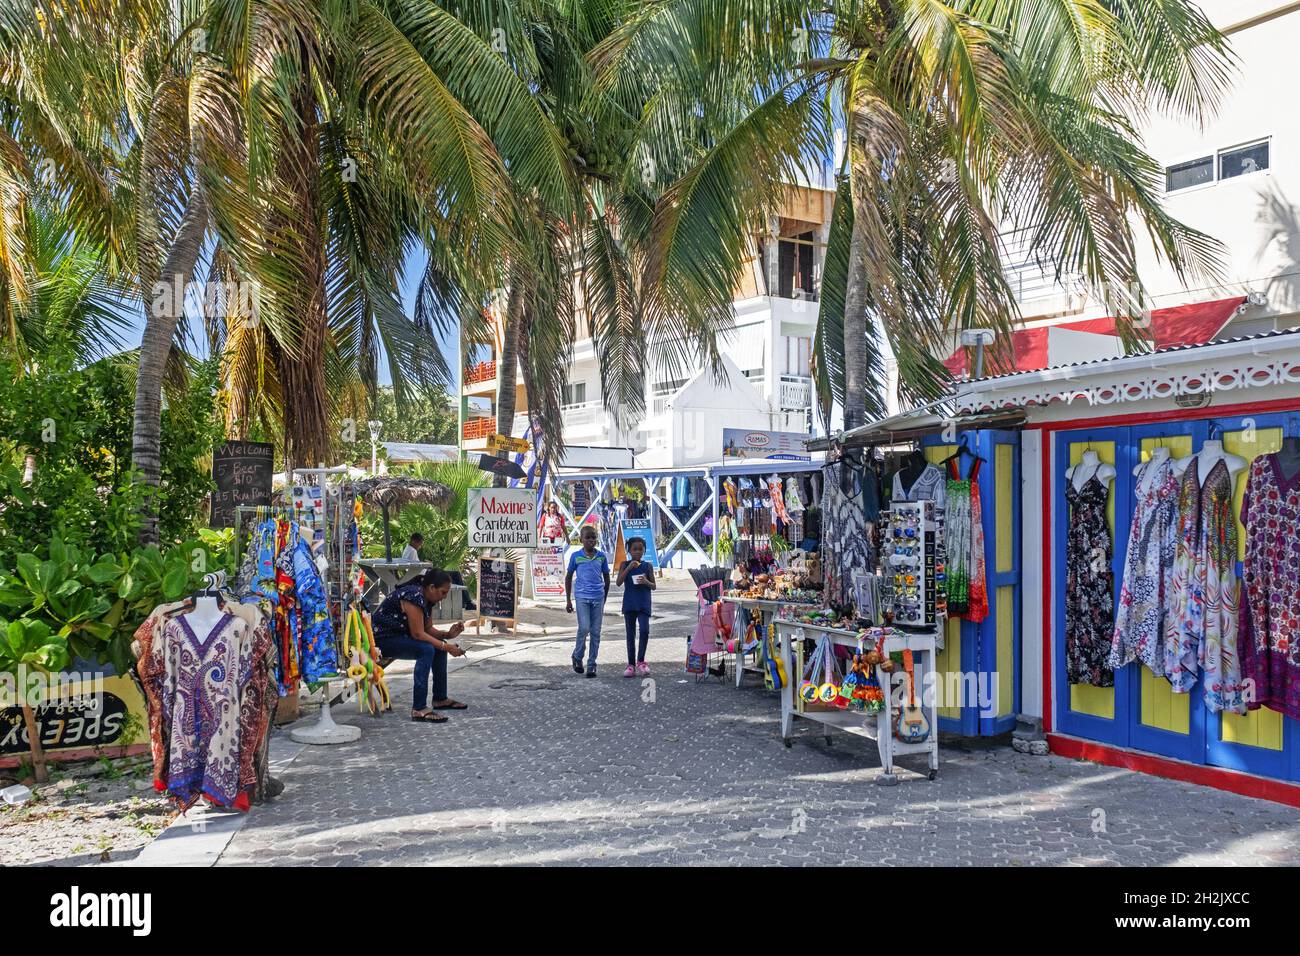 Souvenirs shop and palm trees along boulevard in the capital city Philipsburg of the Dutch island part of Sint Maarten / Saint Martin in the Caribbean Stock Photo